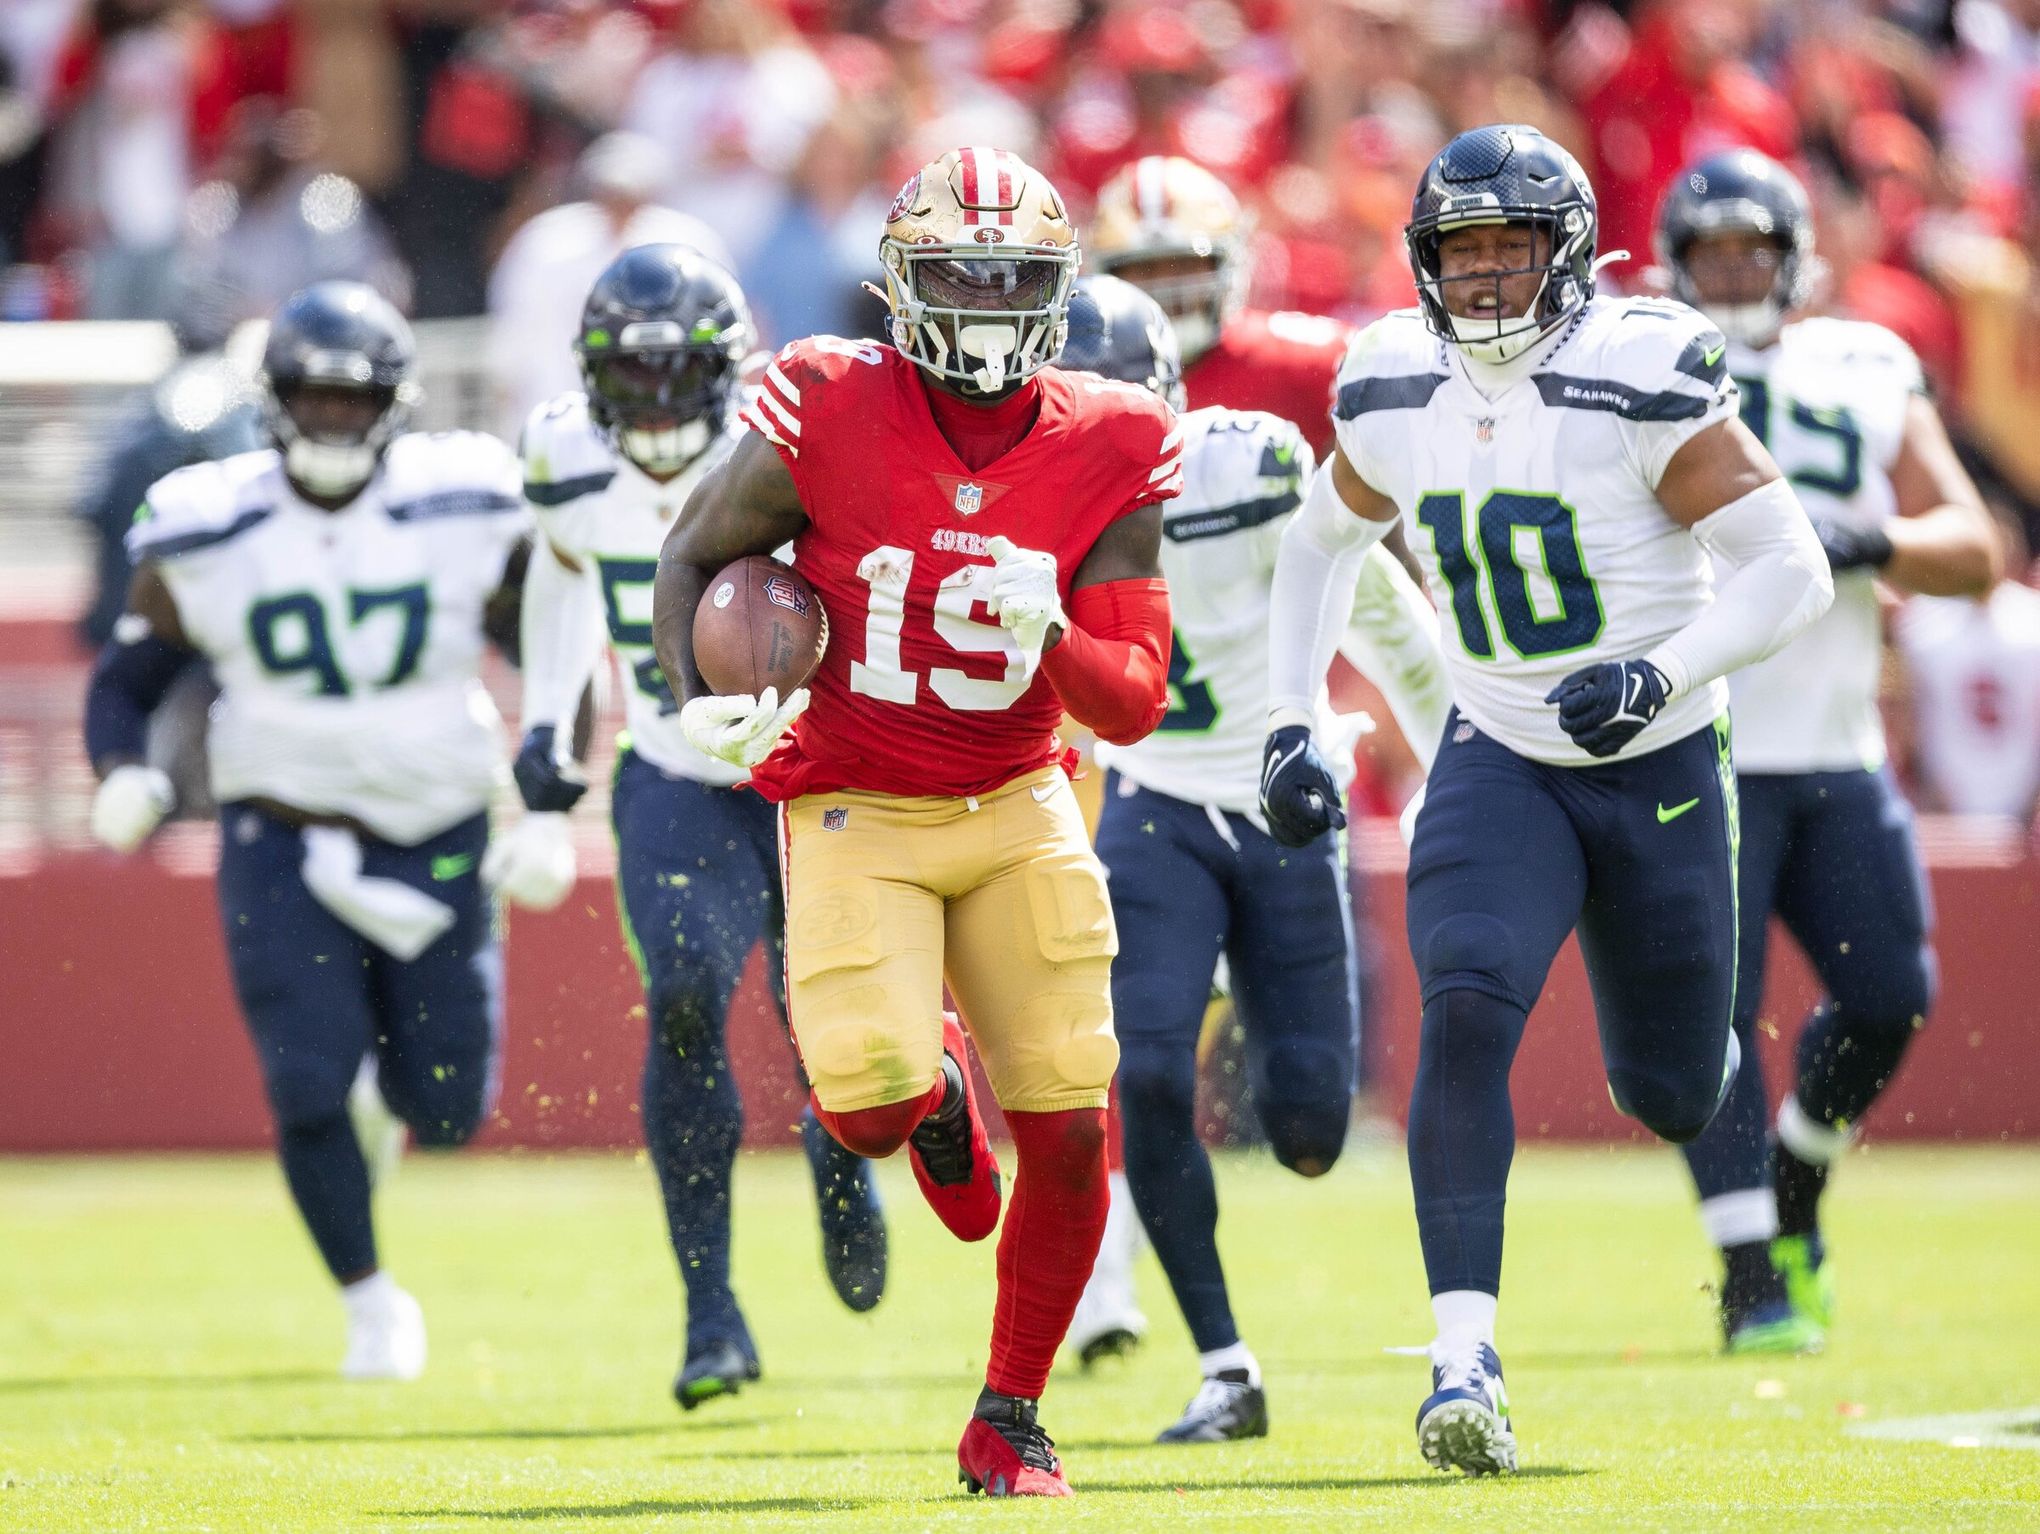 Nothing worked' for Seahawks in dismal 27-7 loss to 49ers